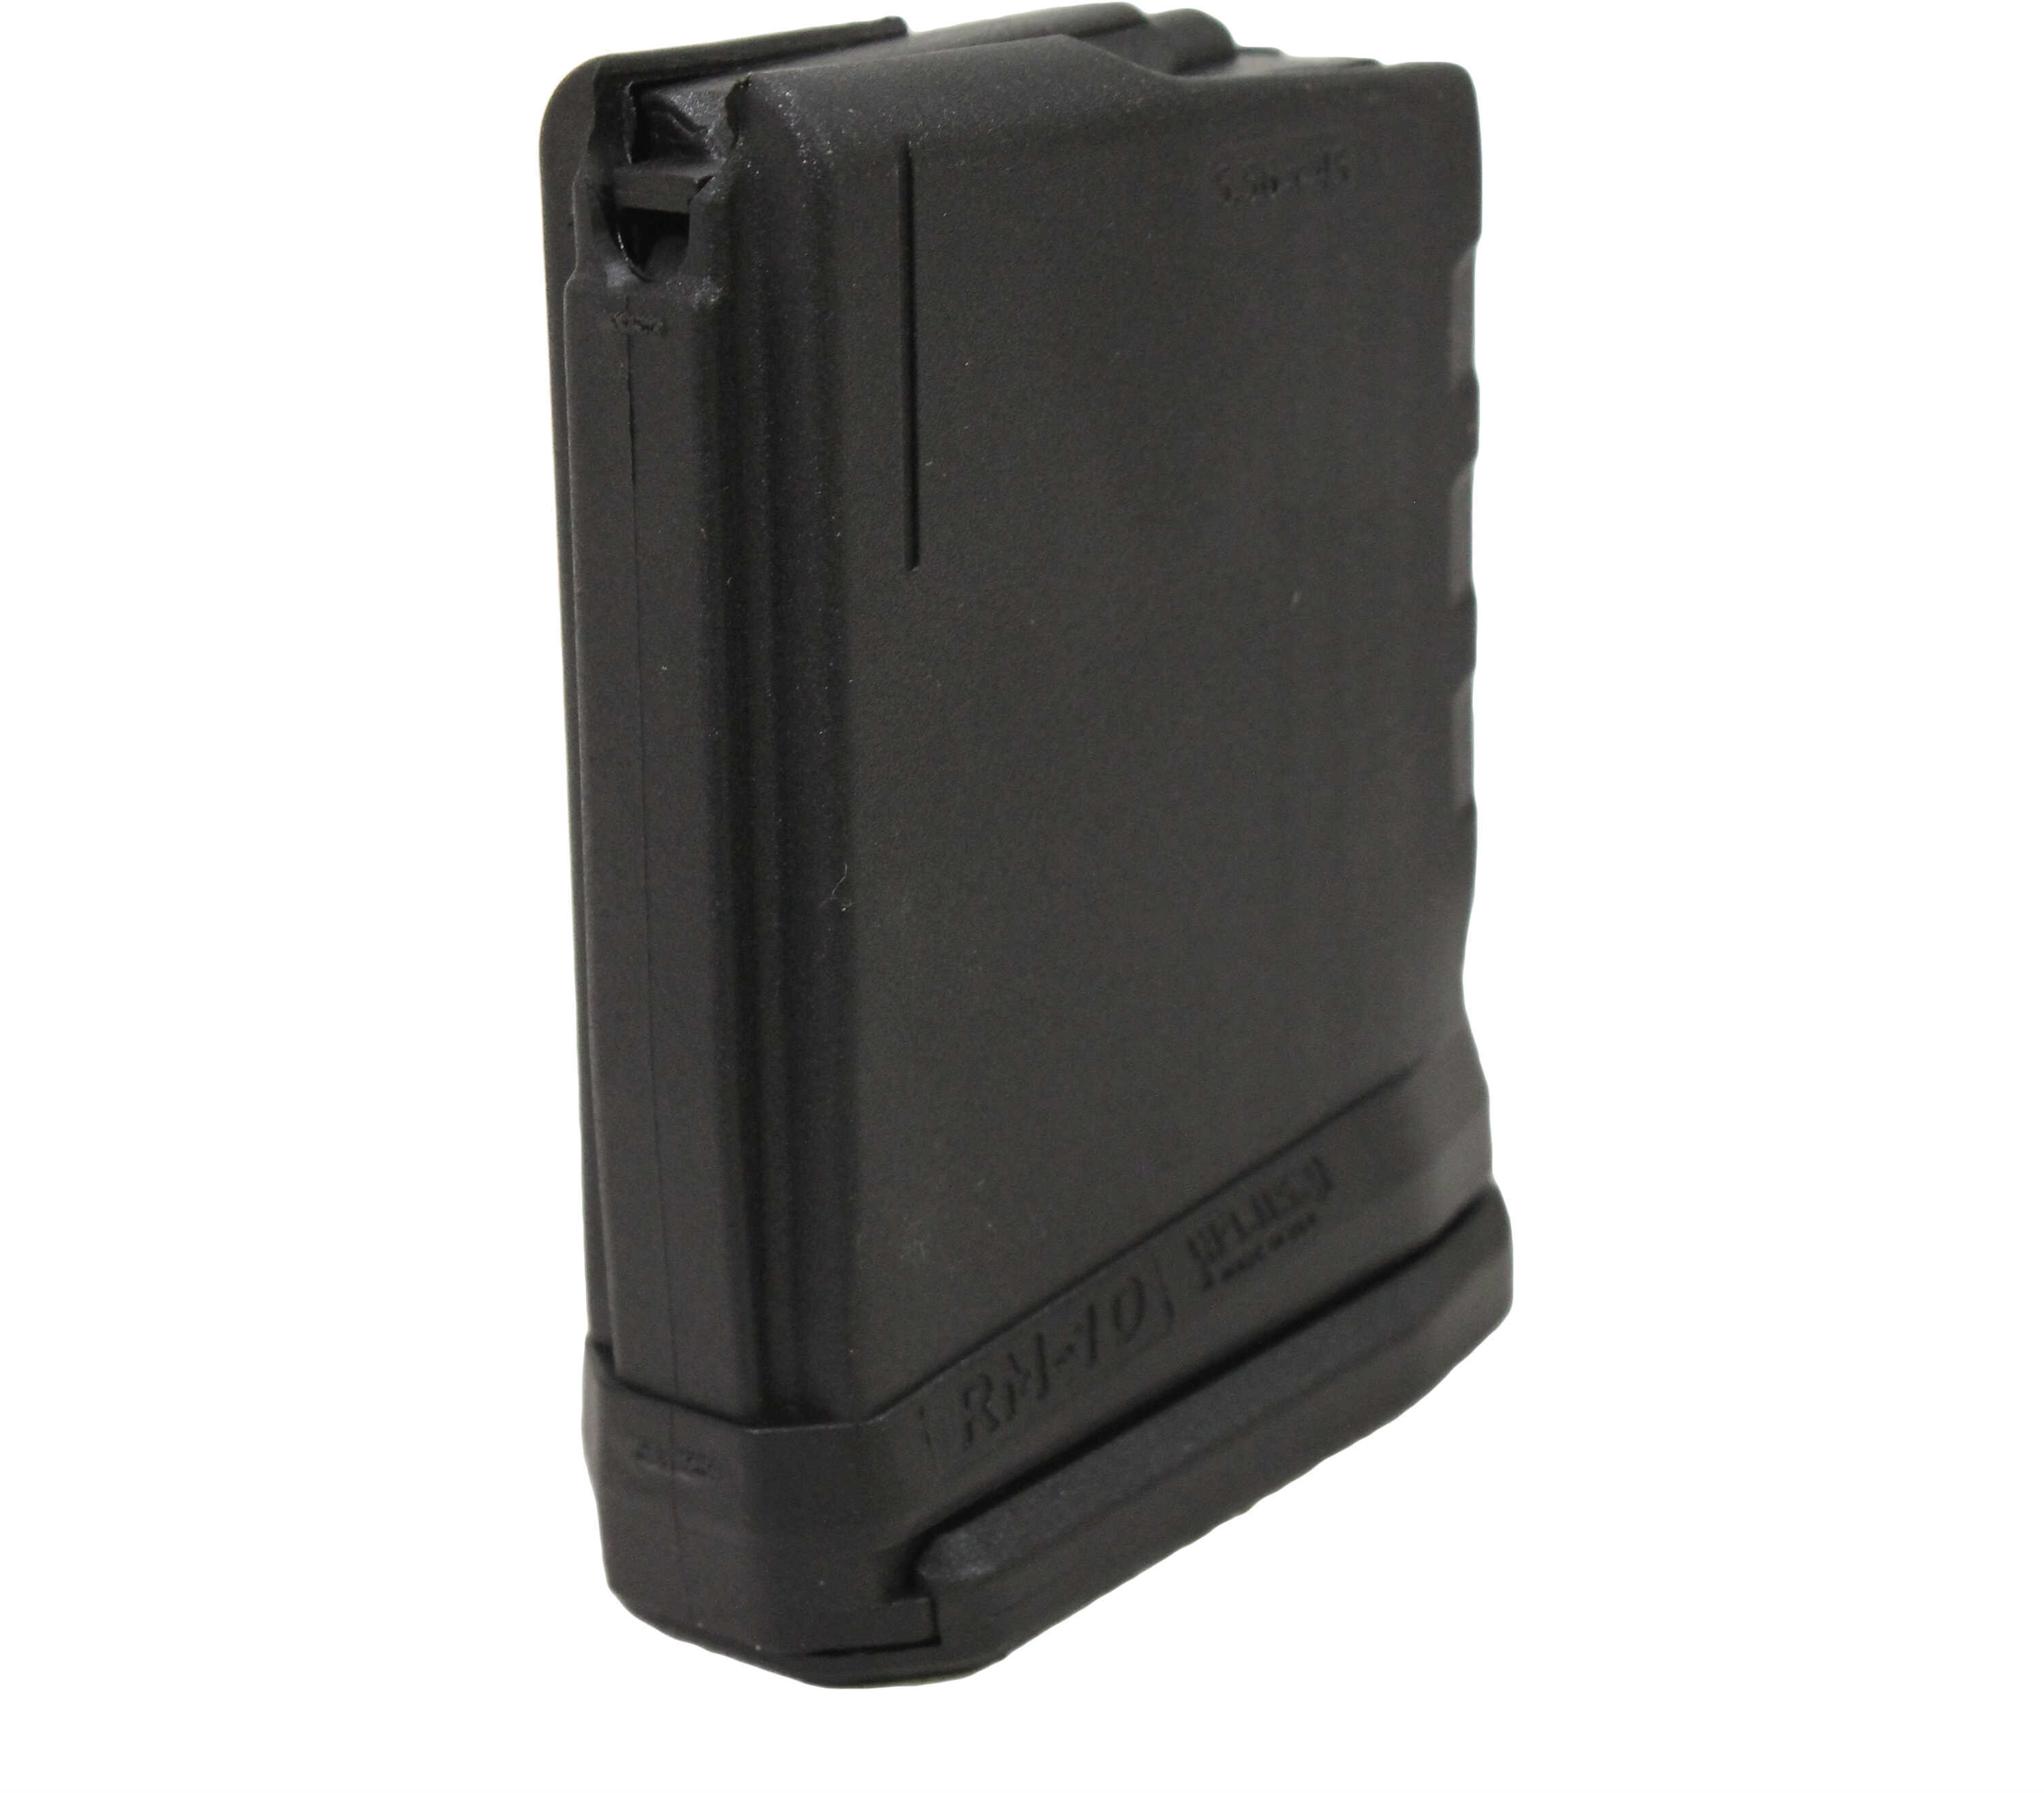 ProMag AR-15 5.56mm Roller Follower 10 Rounds, Black Polymer Md: RM-10